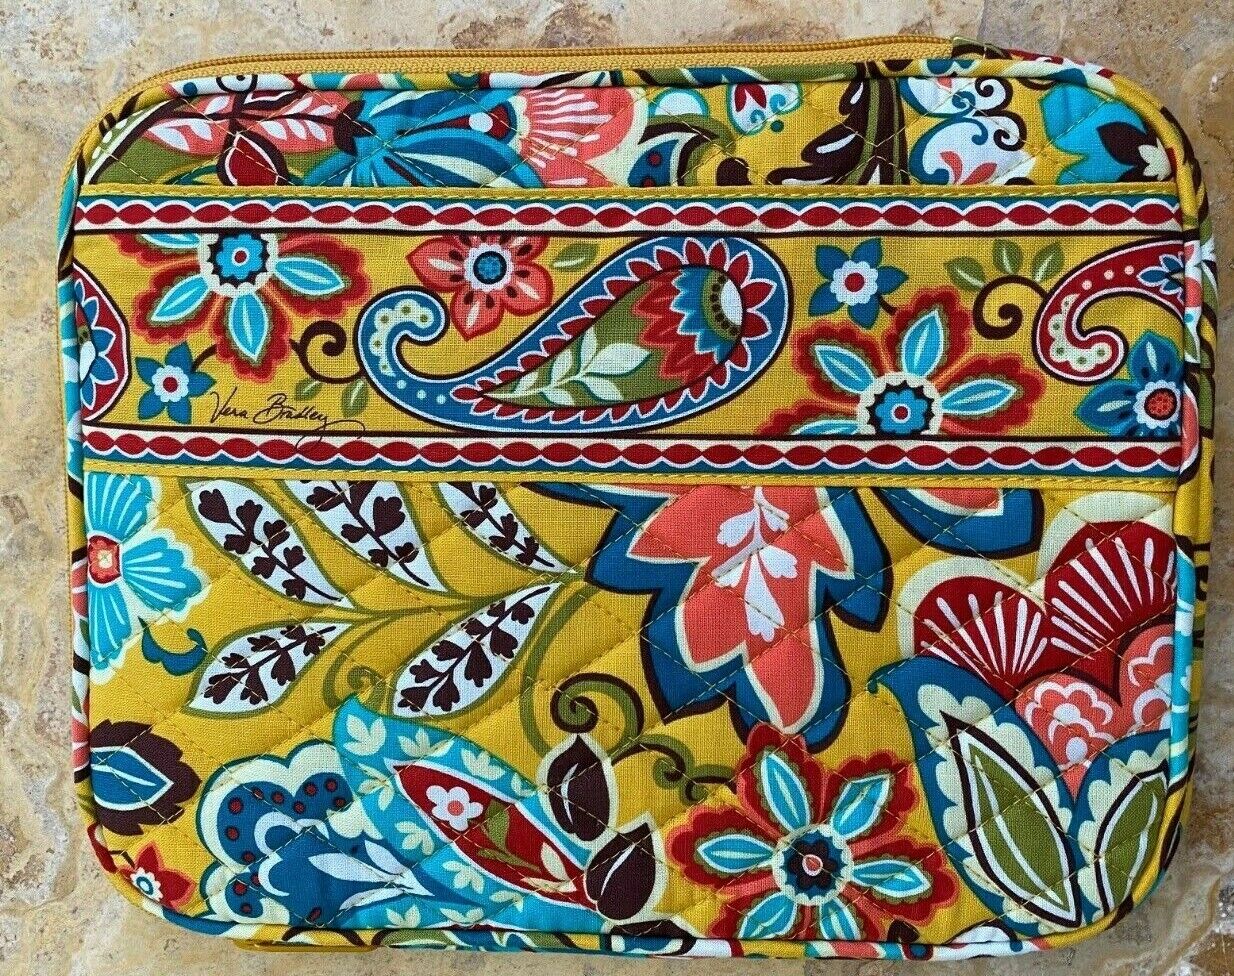 NWOT - Vera Bradley - Yellow Floral Quilted Table Case